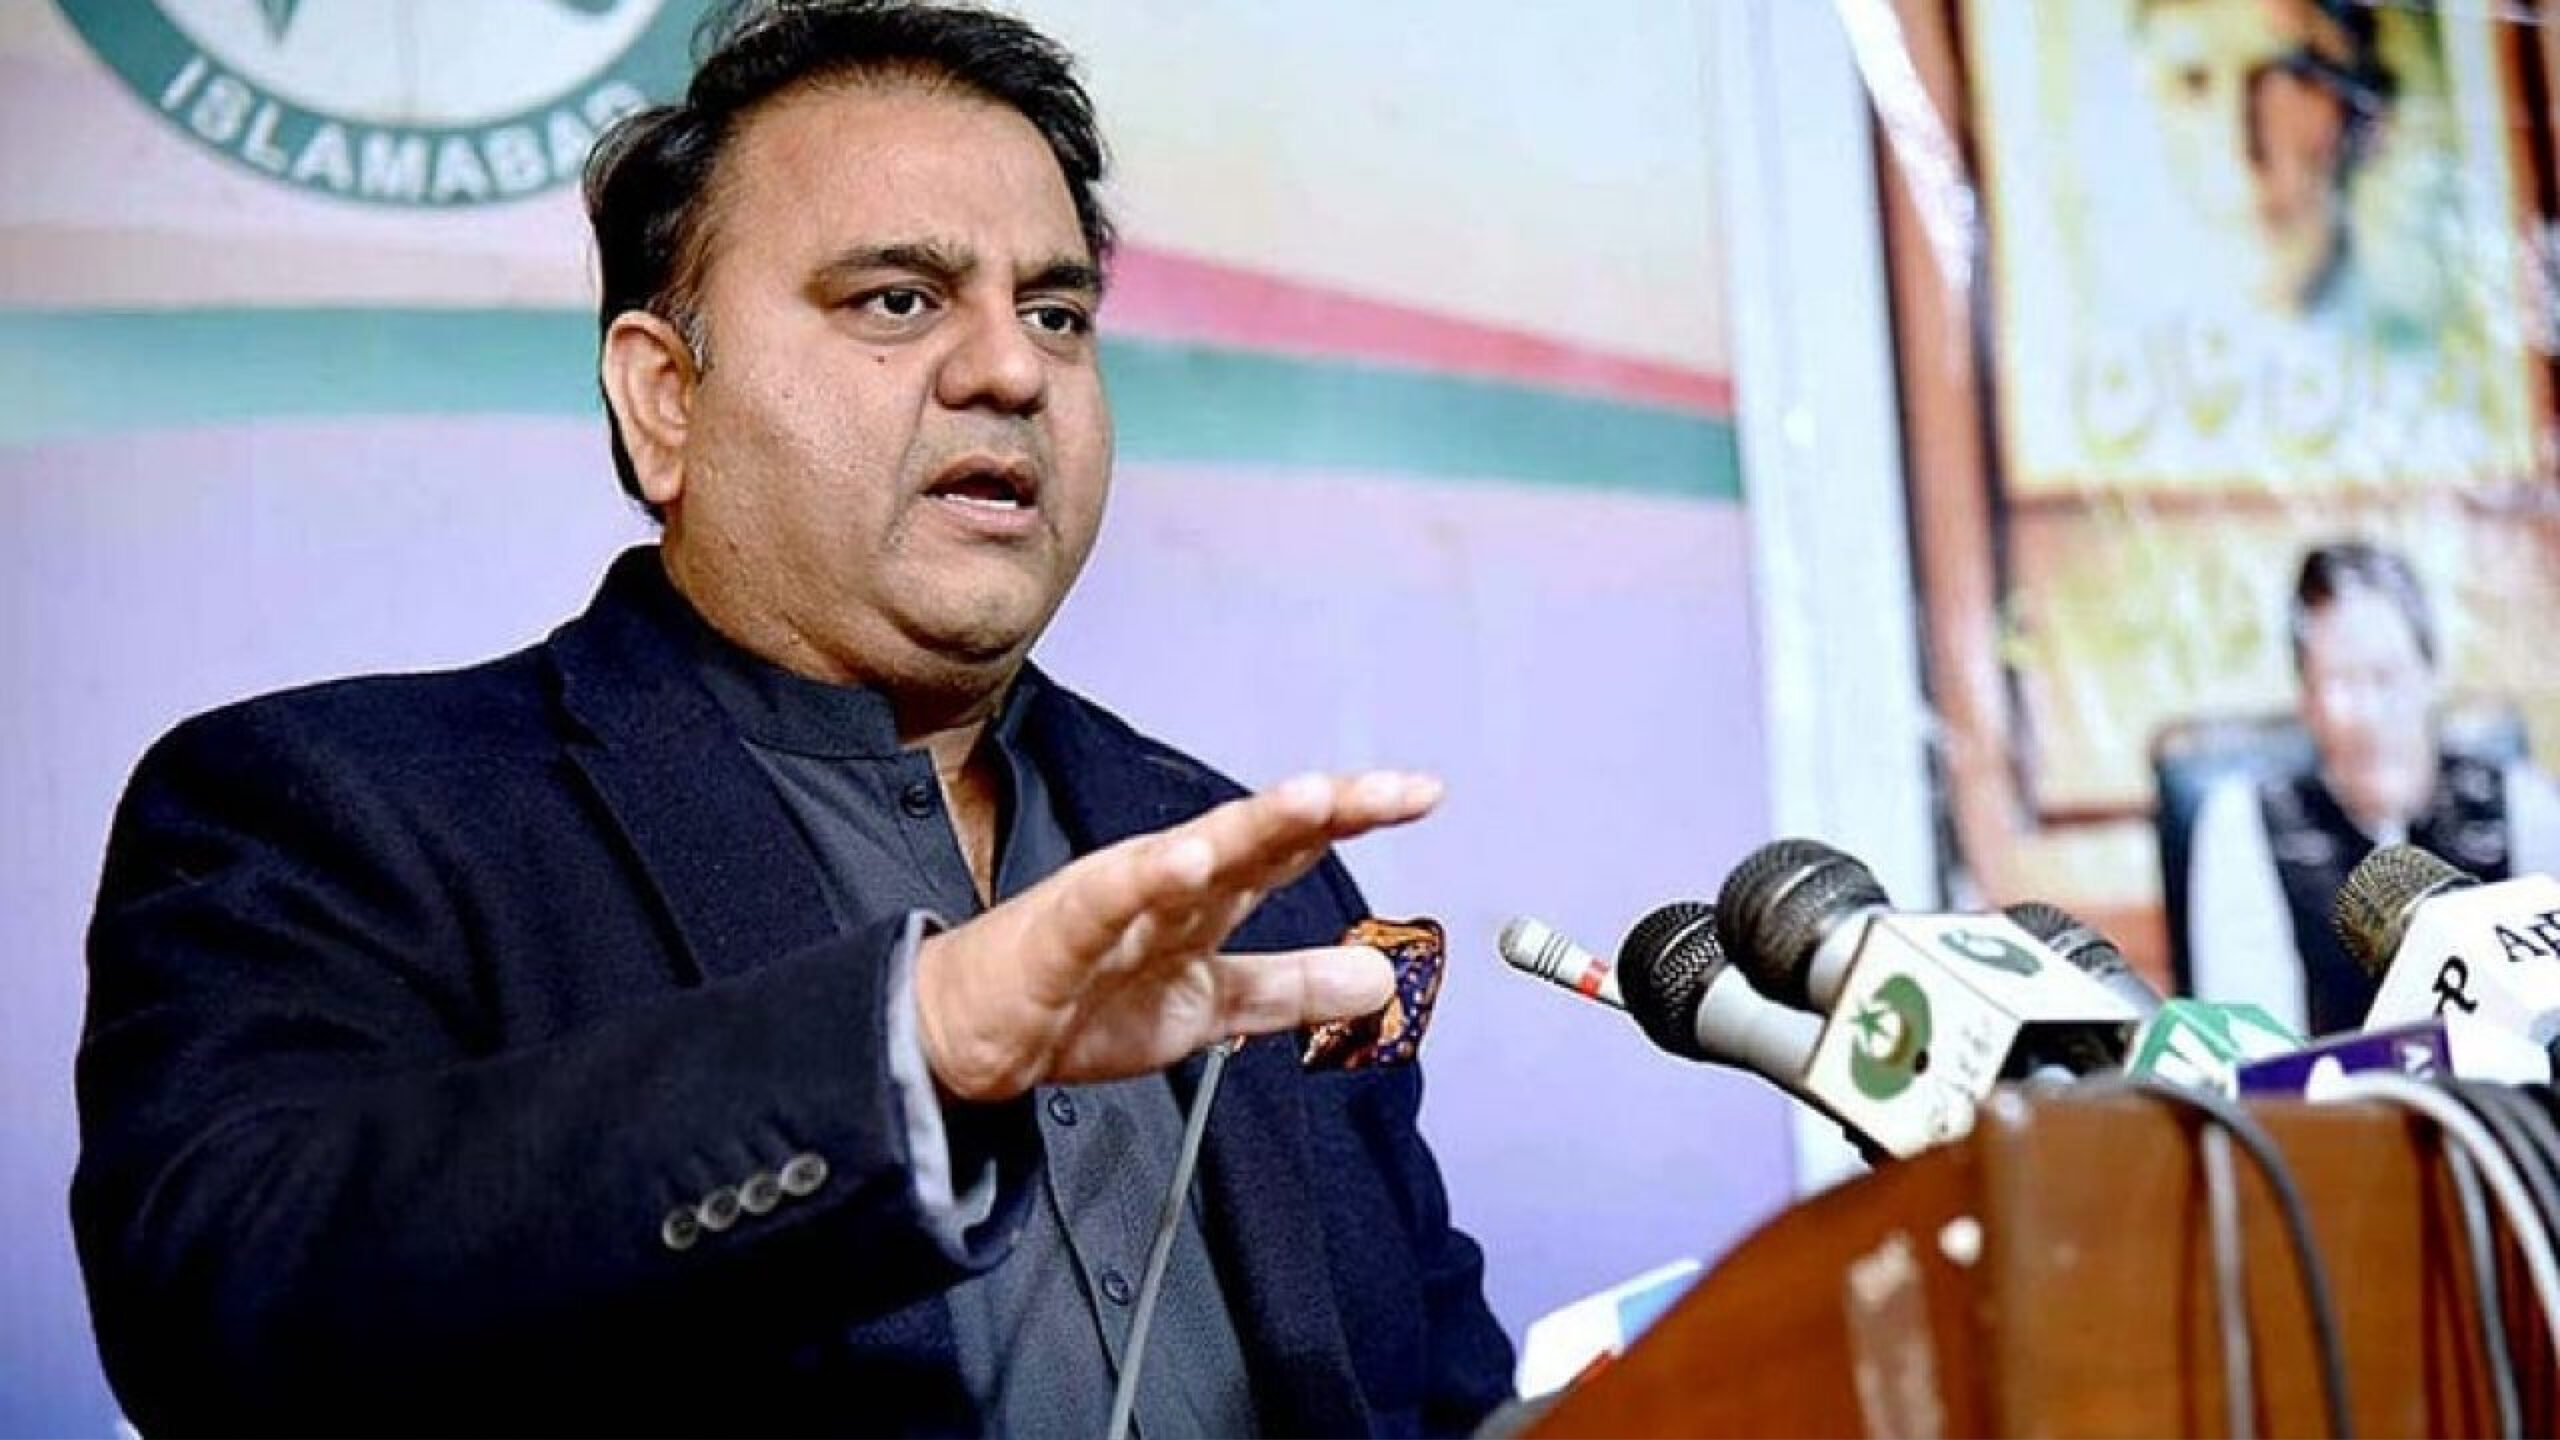 Headline State keen to talk to Baloch insurgents: Chaudhary